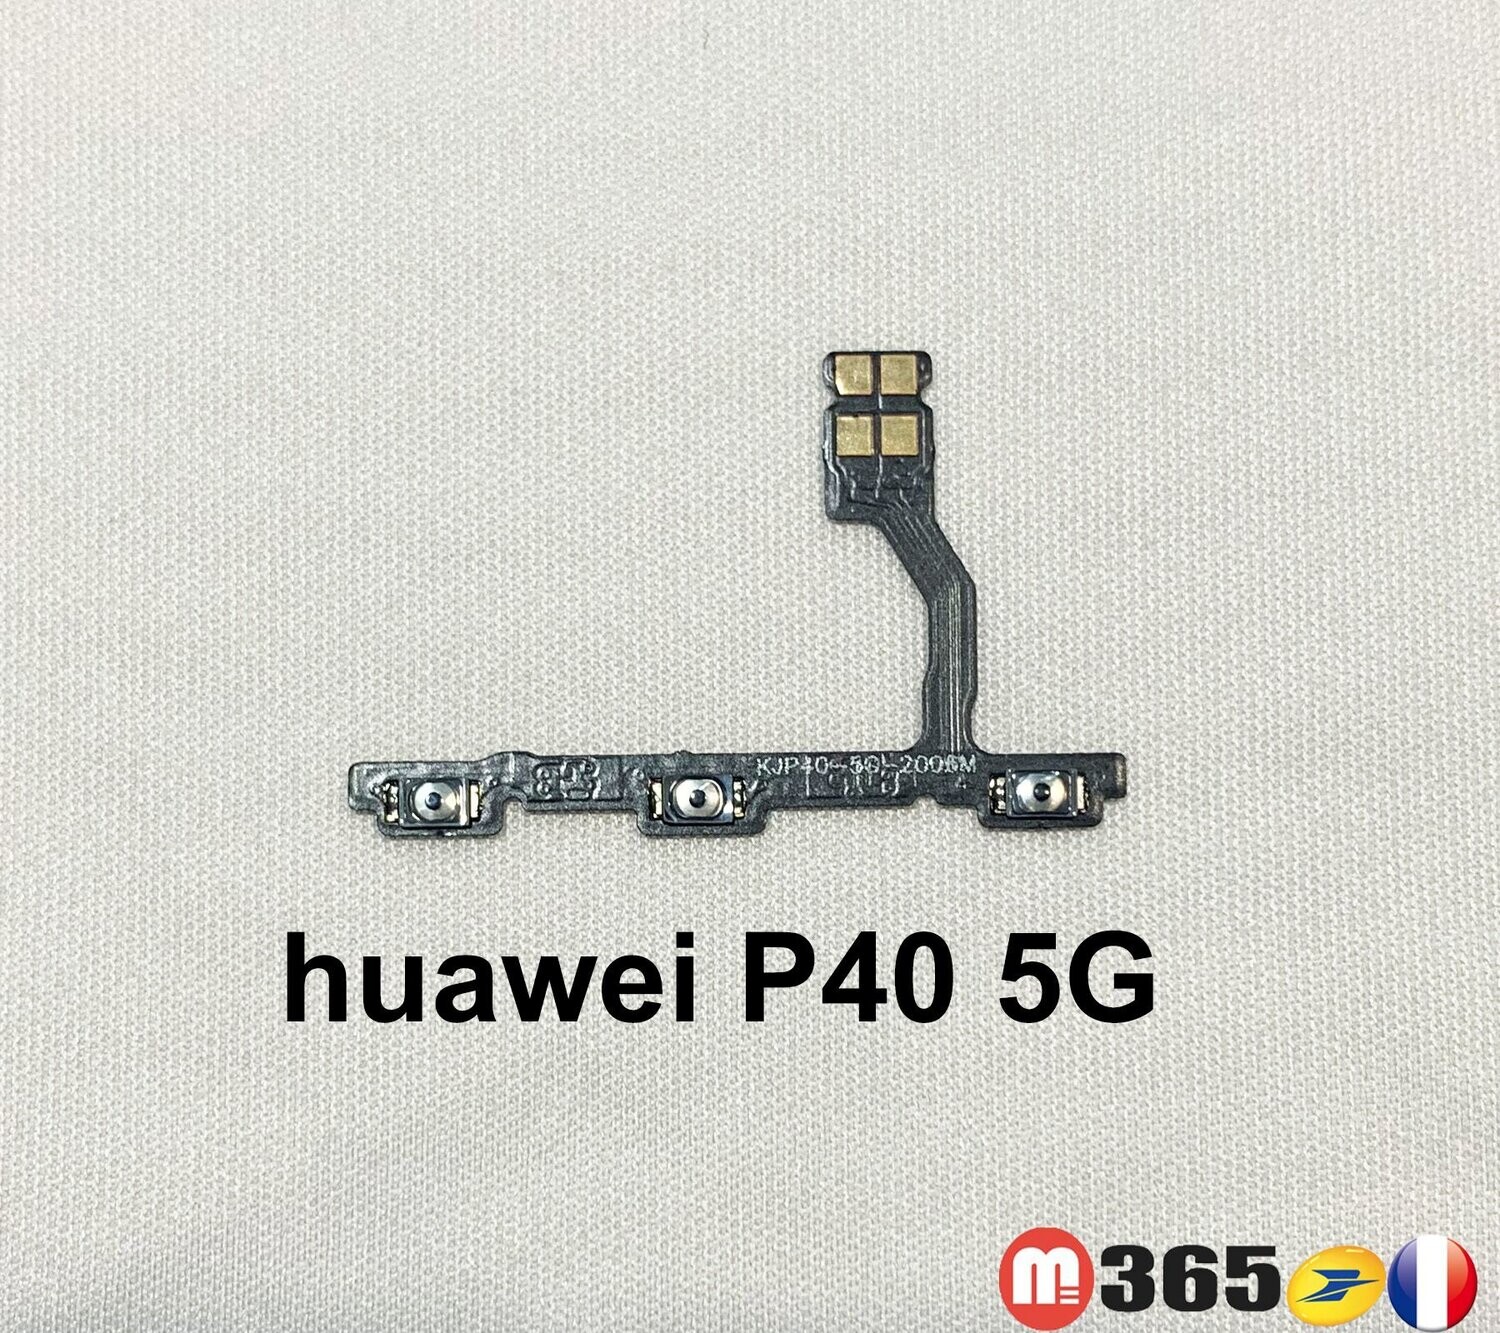 nappe ON/OFF huawei p40 Nappe BOUTON POWER démarrage huawei p40